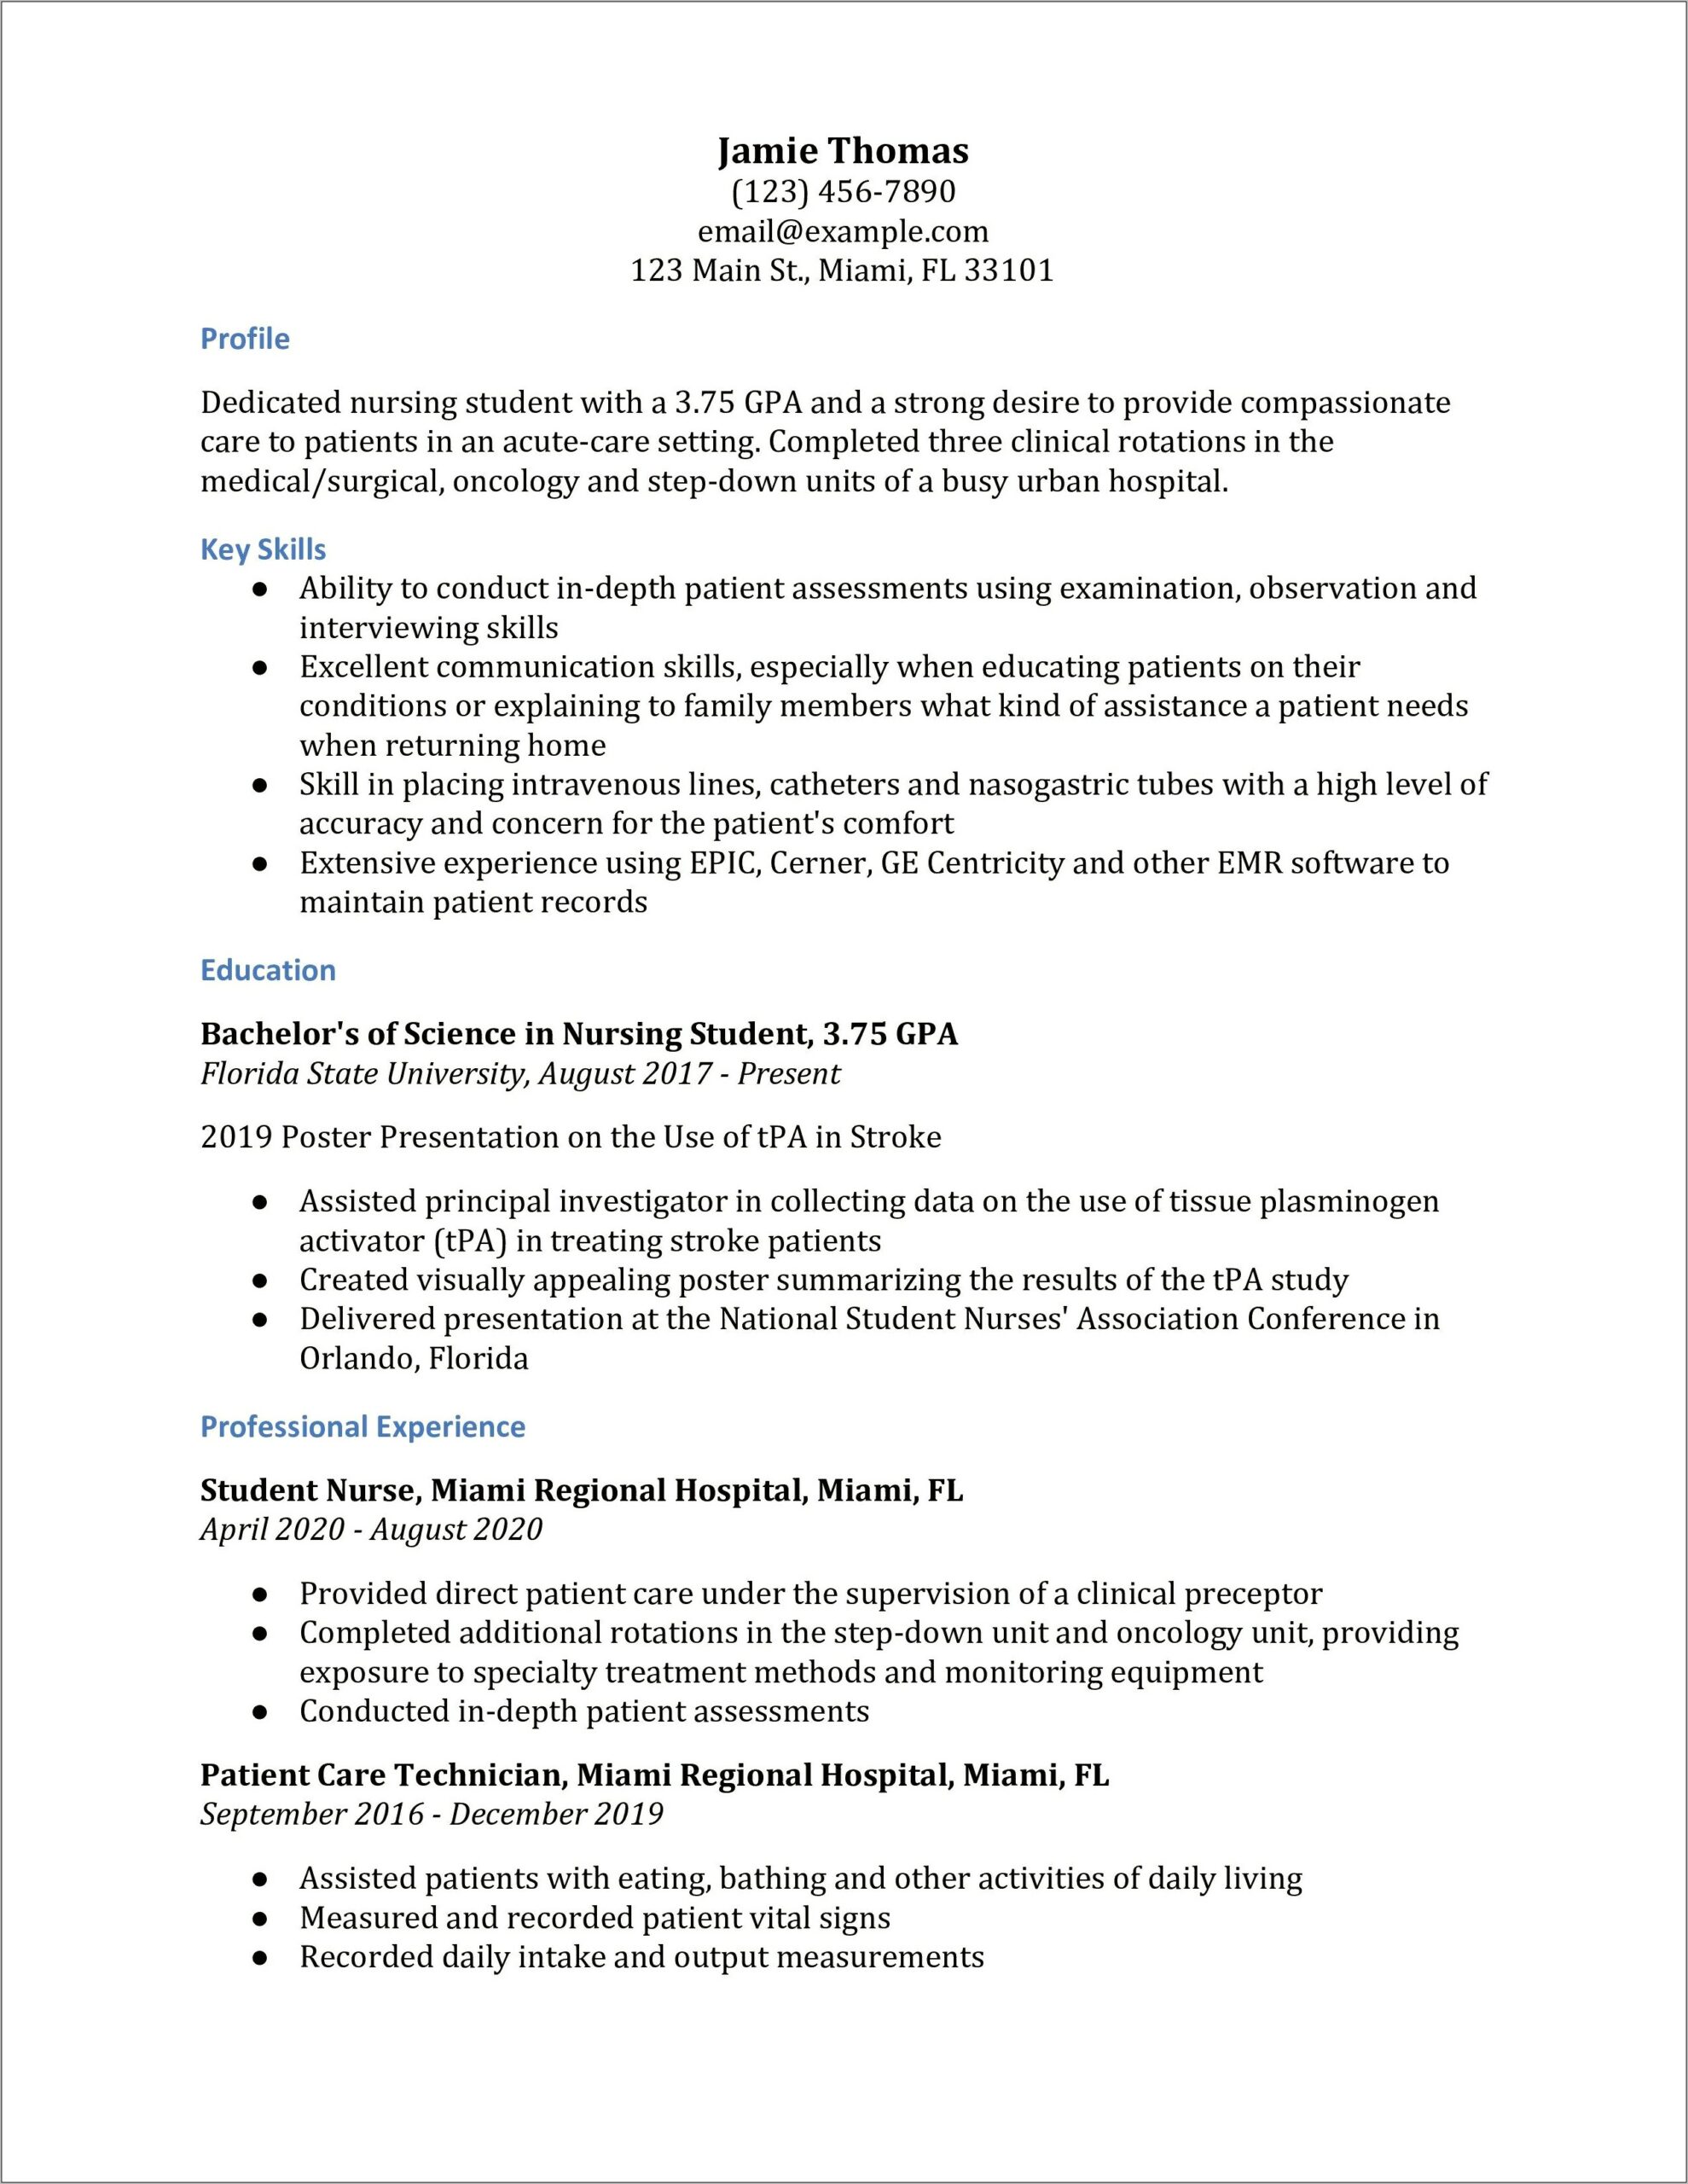 Nursing School Clinical Experience On Resume